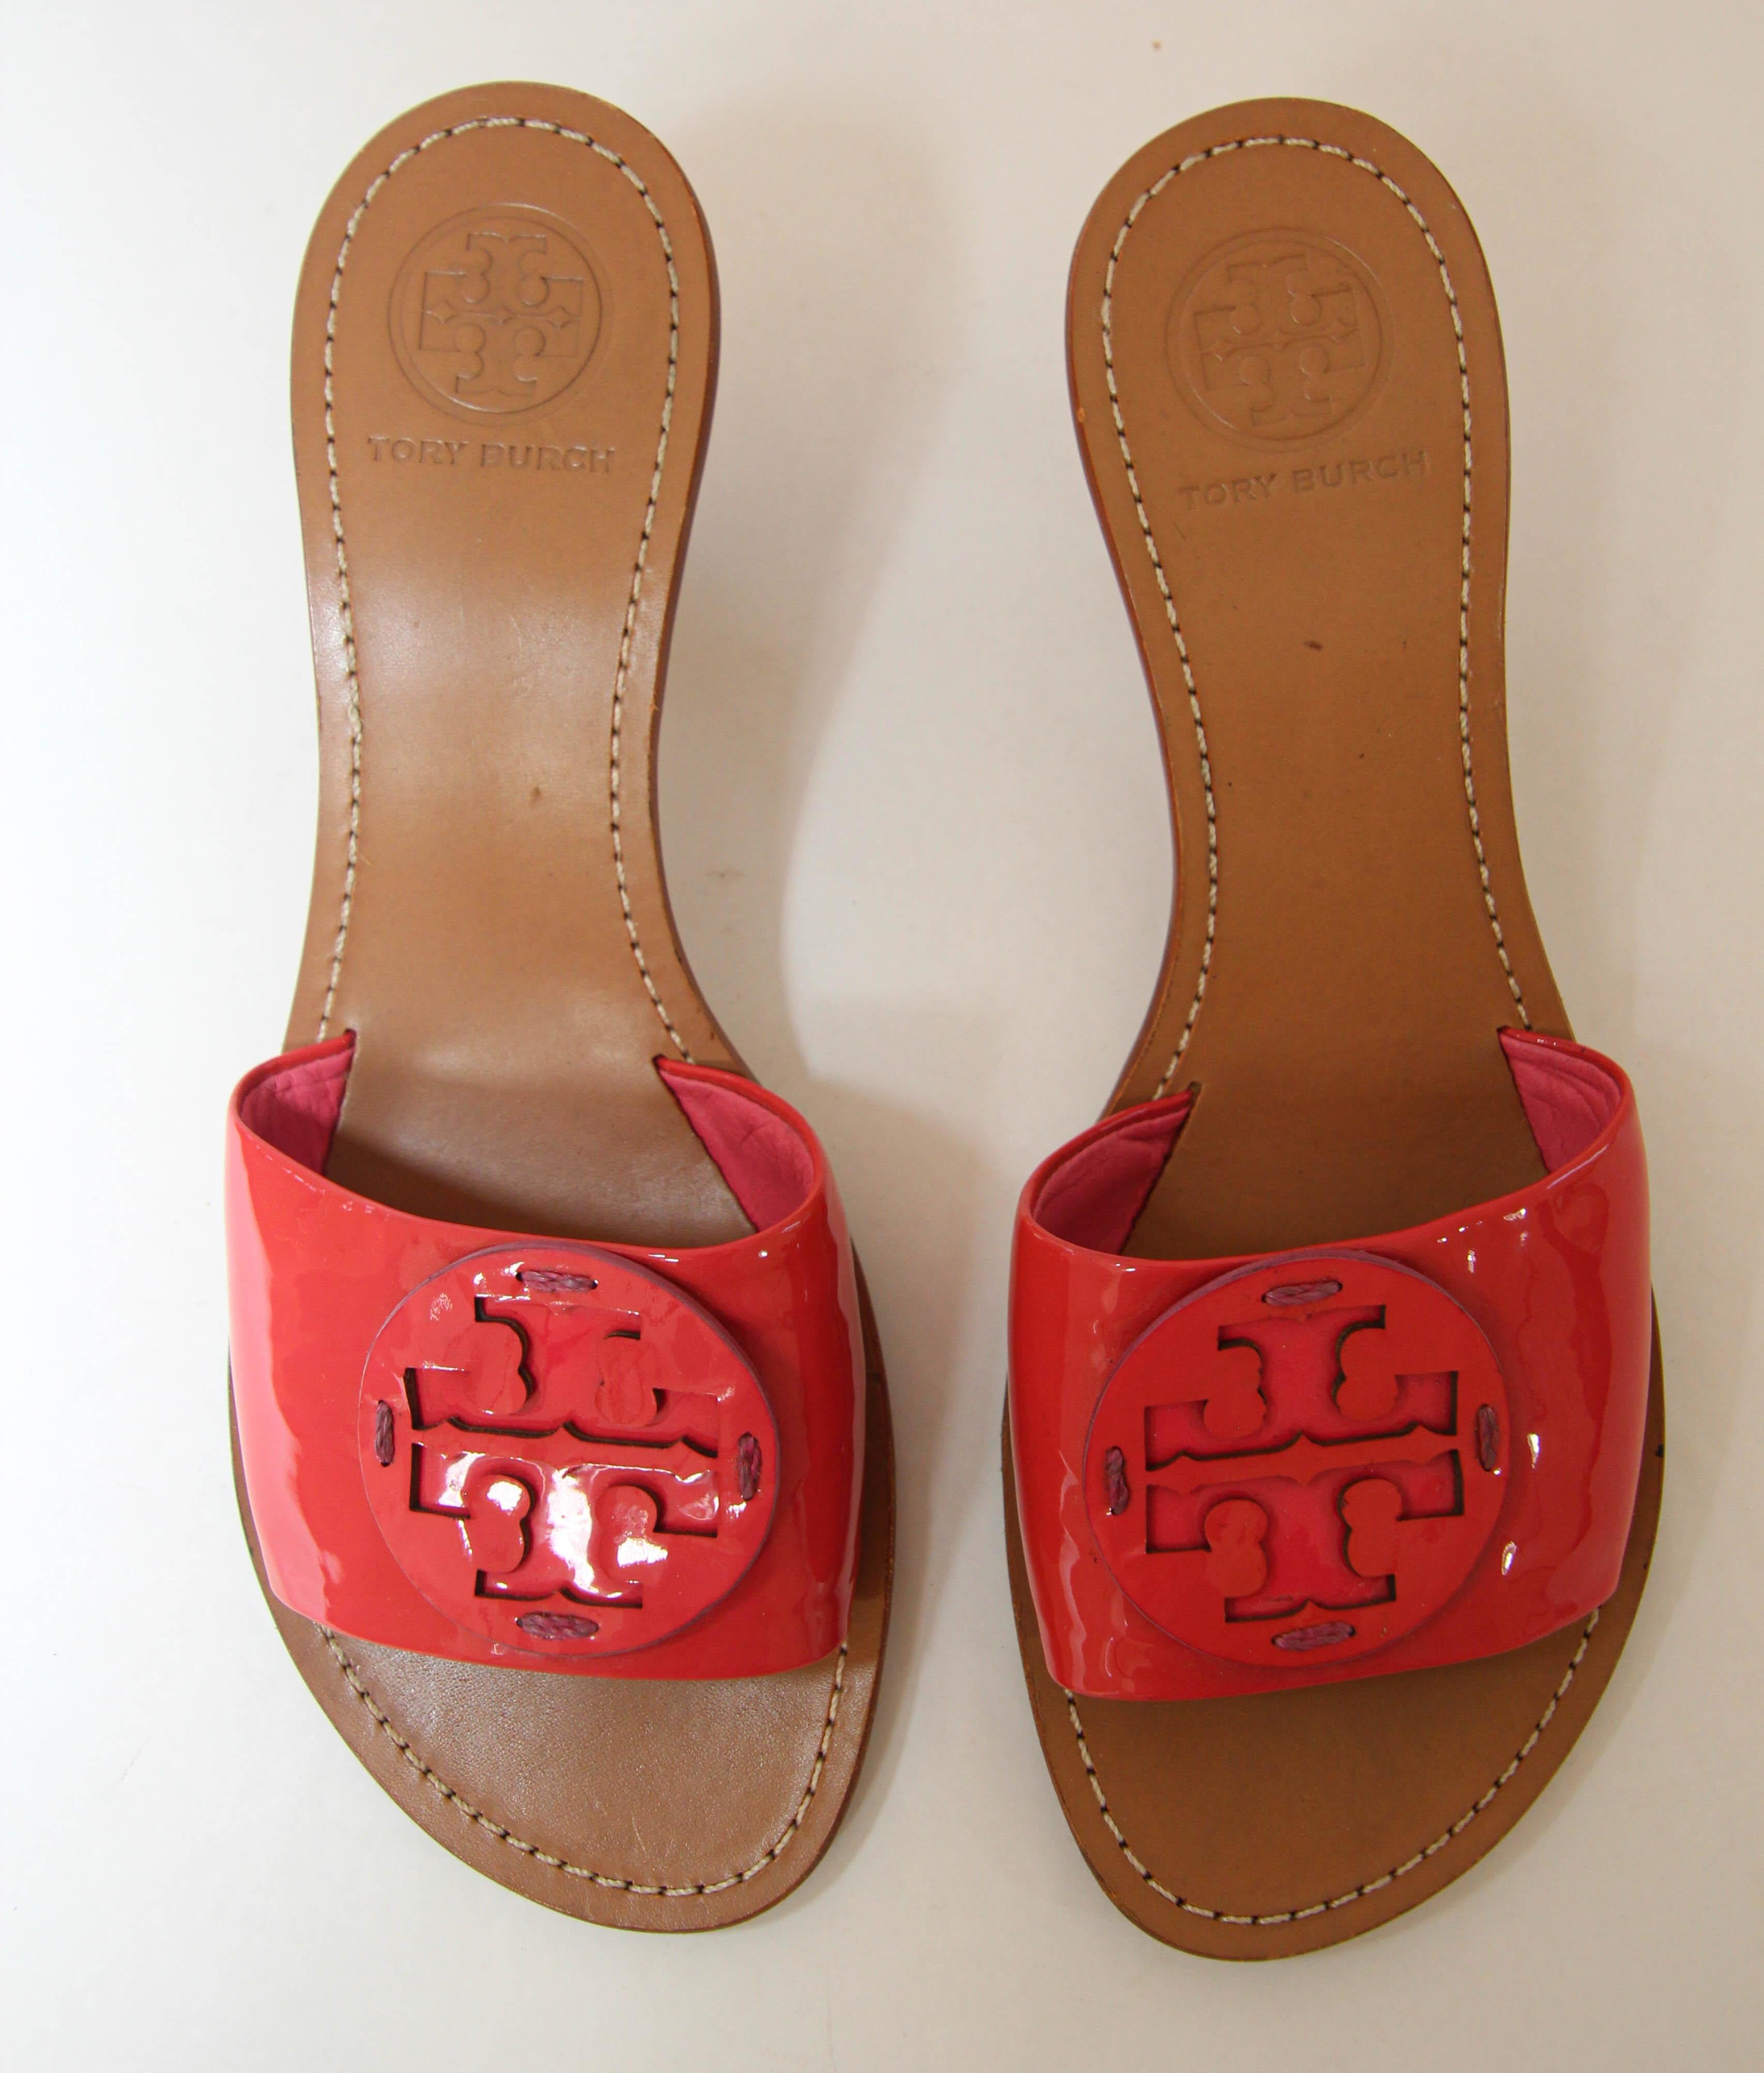 Tory Burch Patent Leather Pink Sandals size 8 M In Good Condition For Sale In North Hollywood, CA